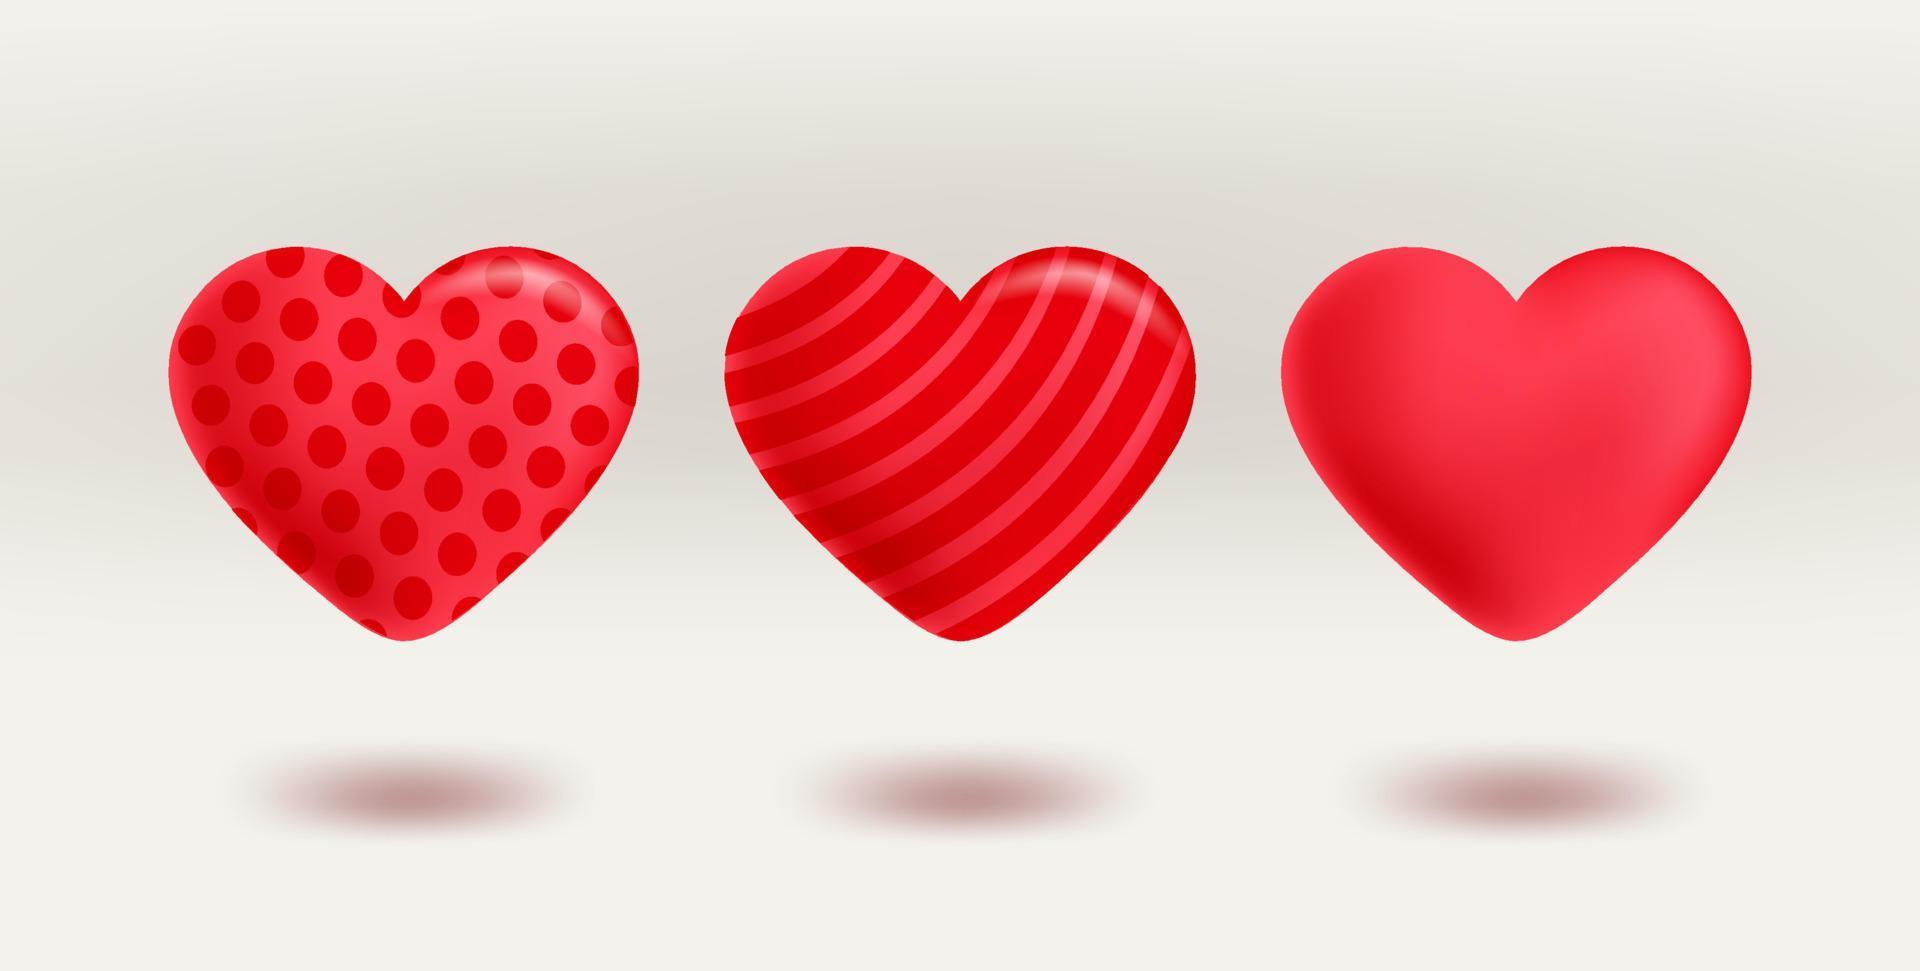 Red hearts with different patterns. 3d vector illustration